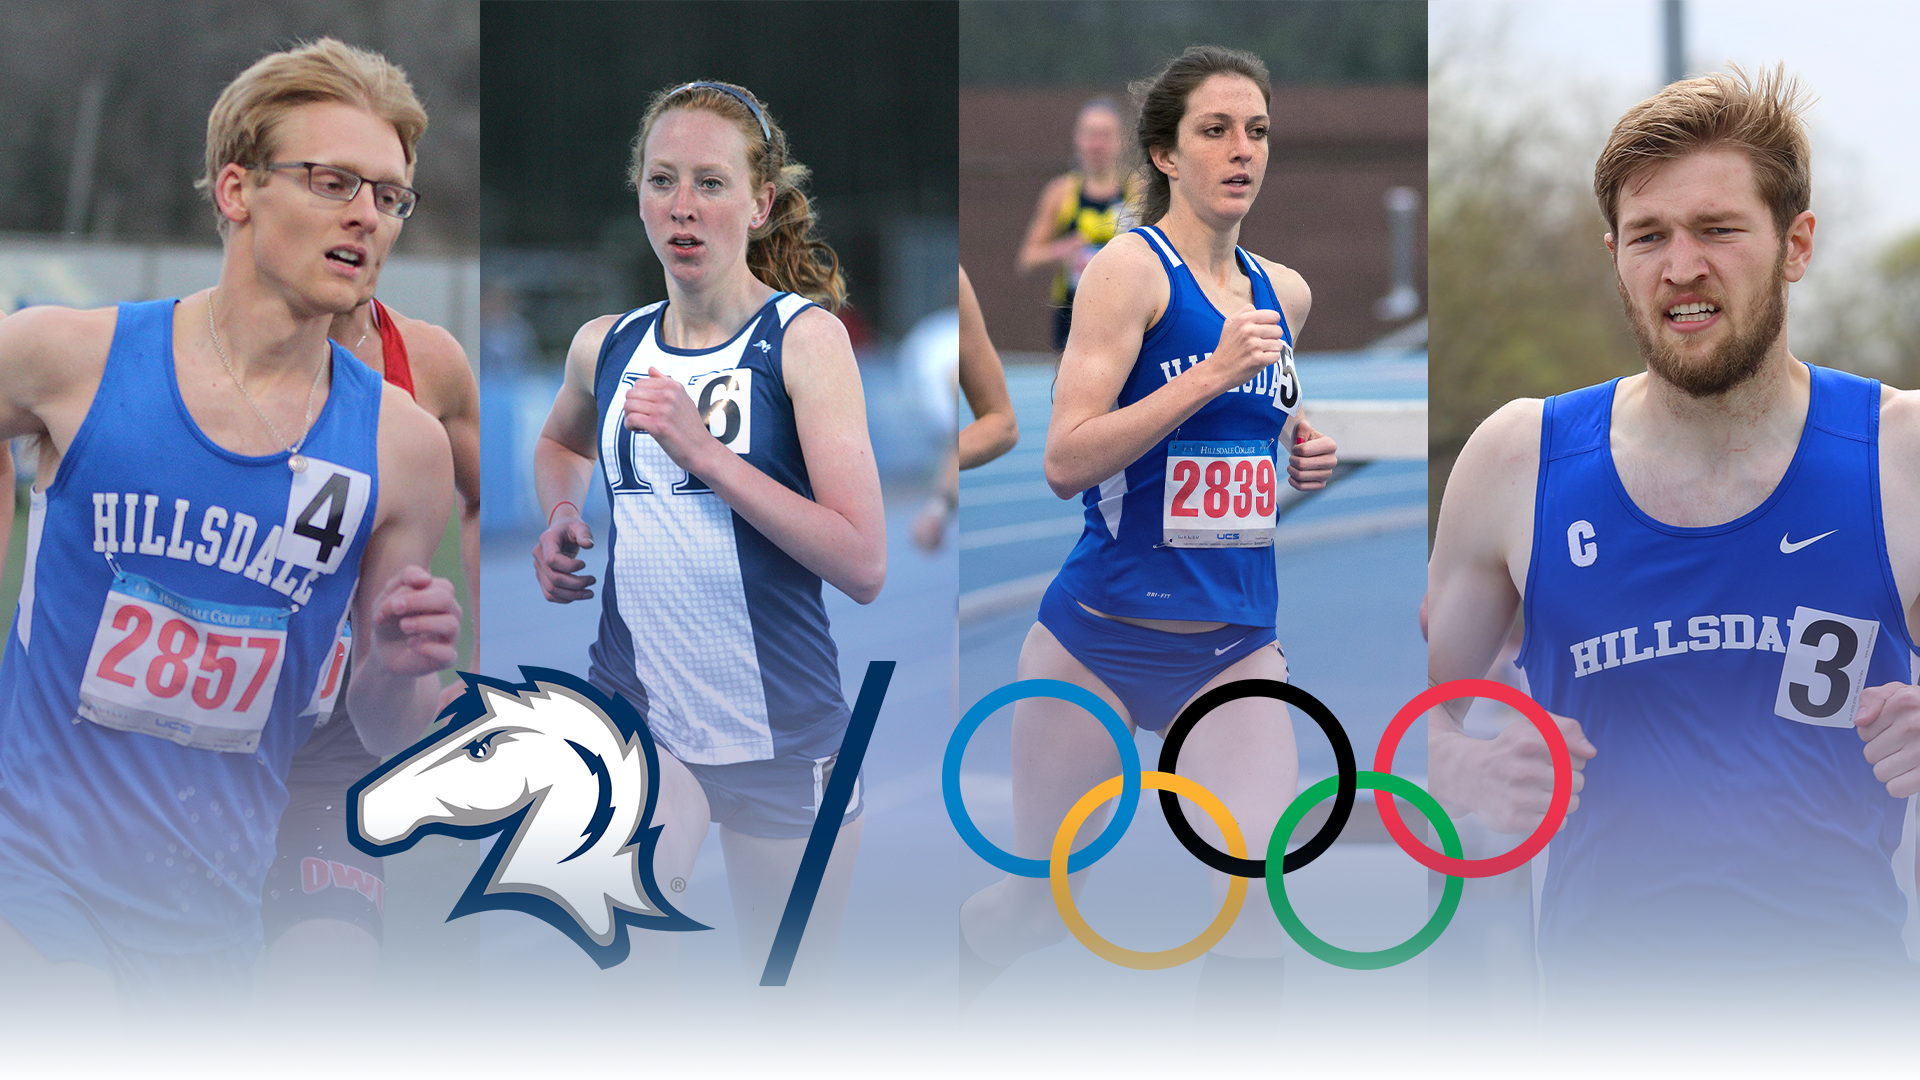 Four Charger track and field alumni slated to compete in Tokyo Olympic Trials